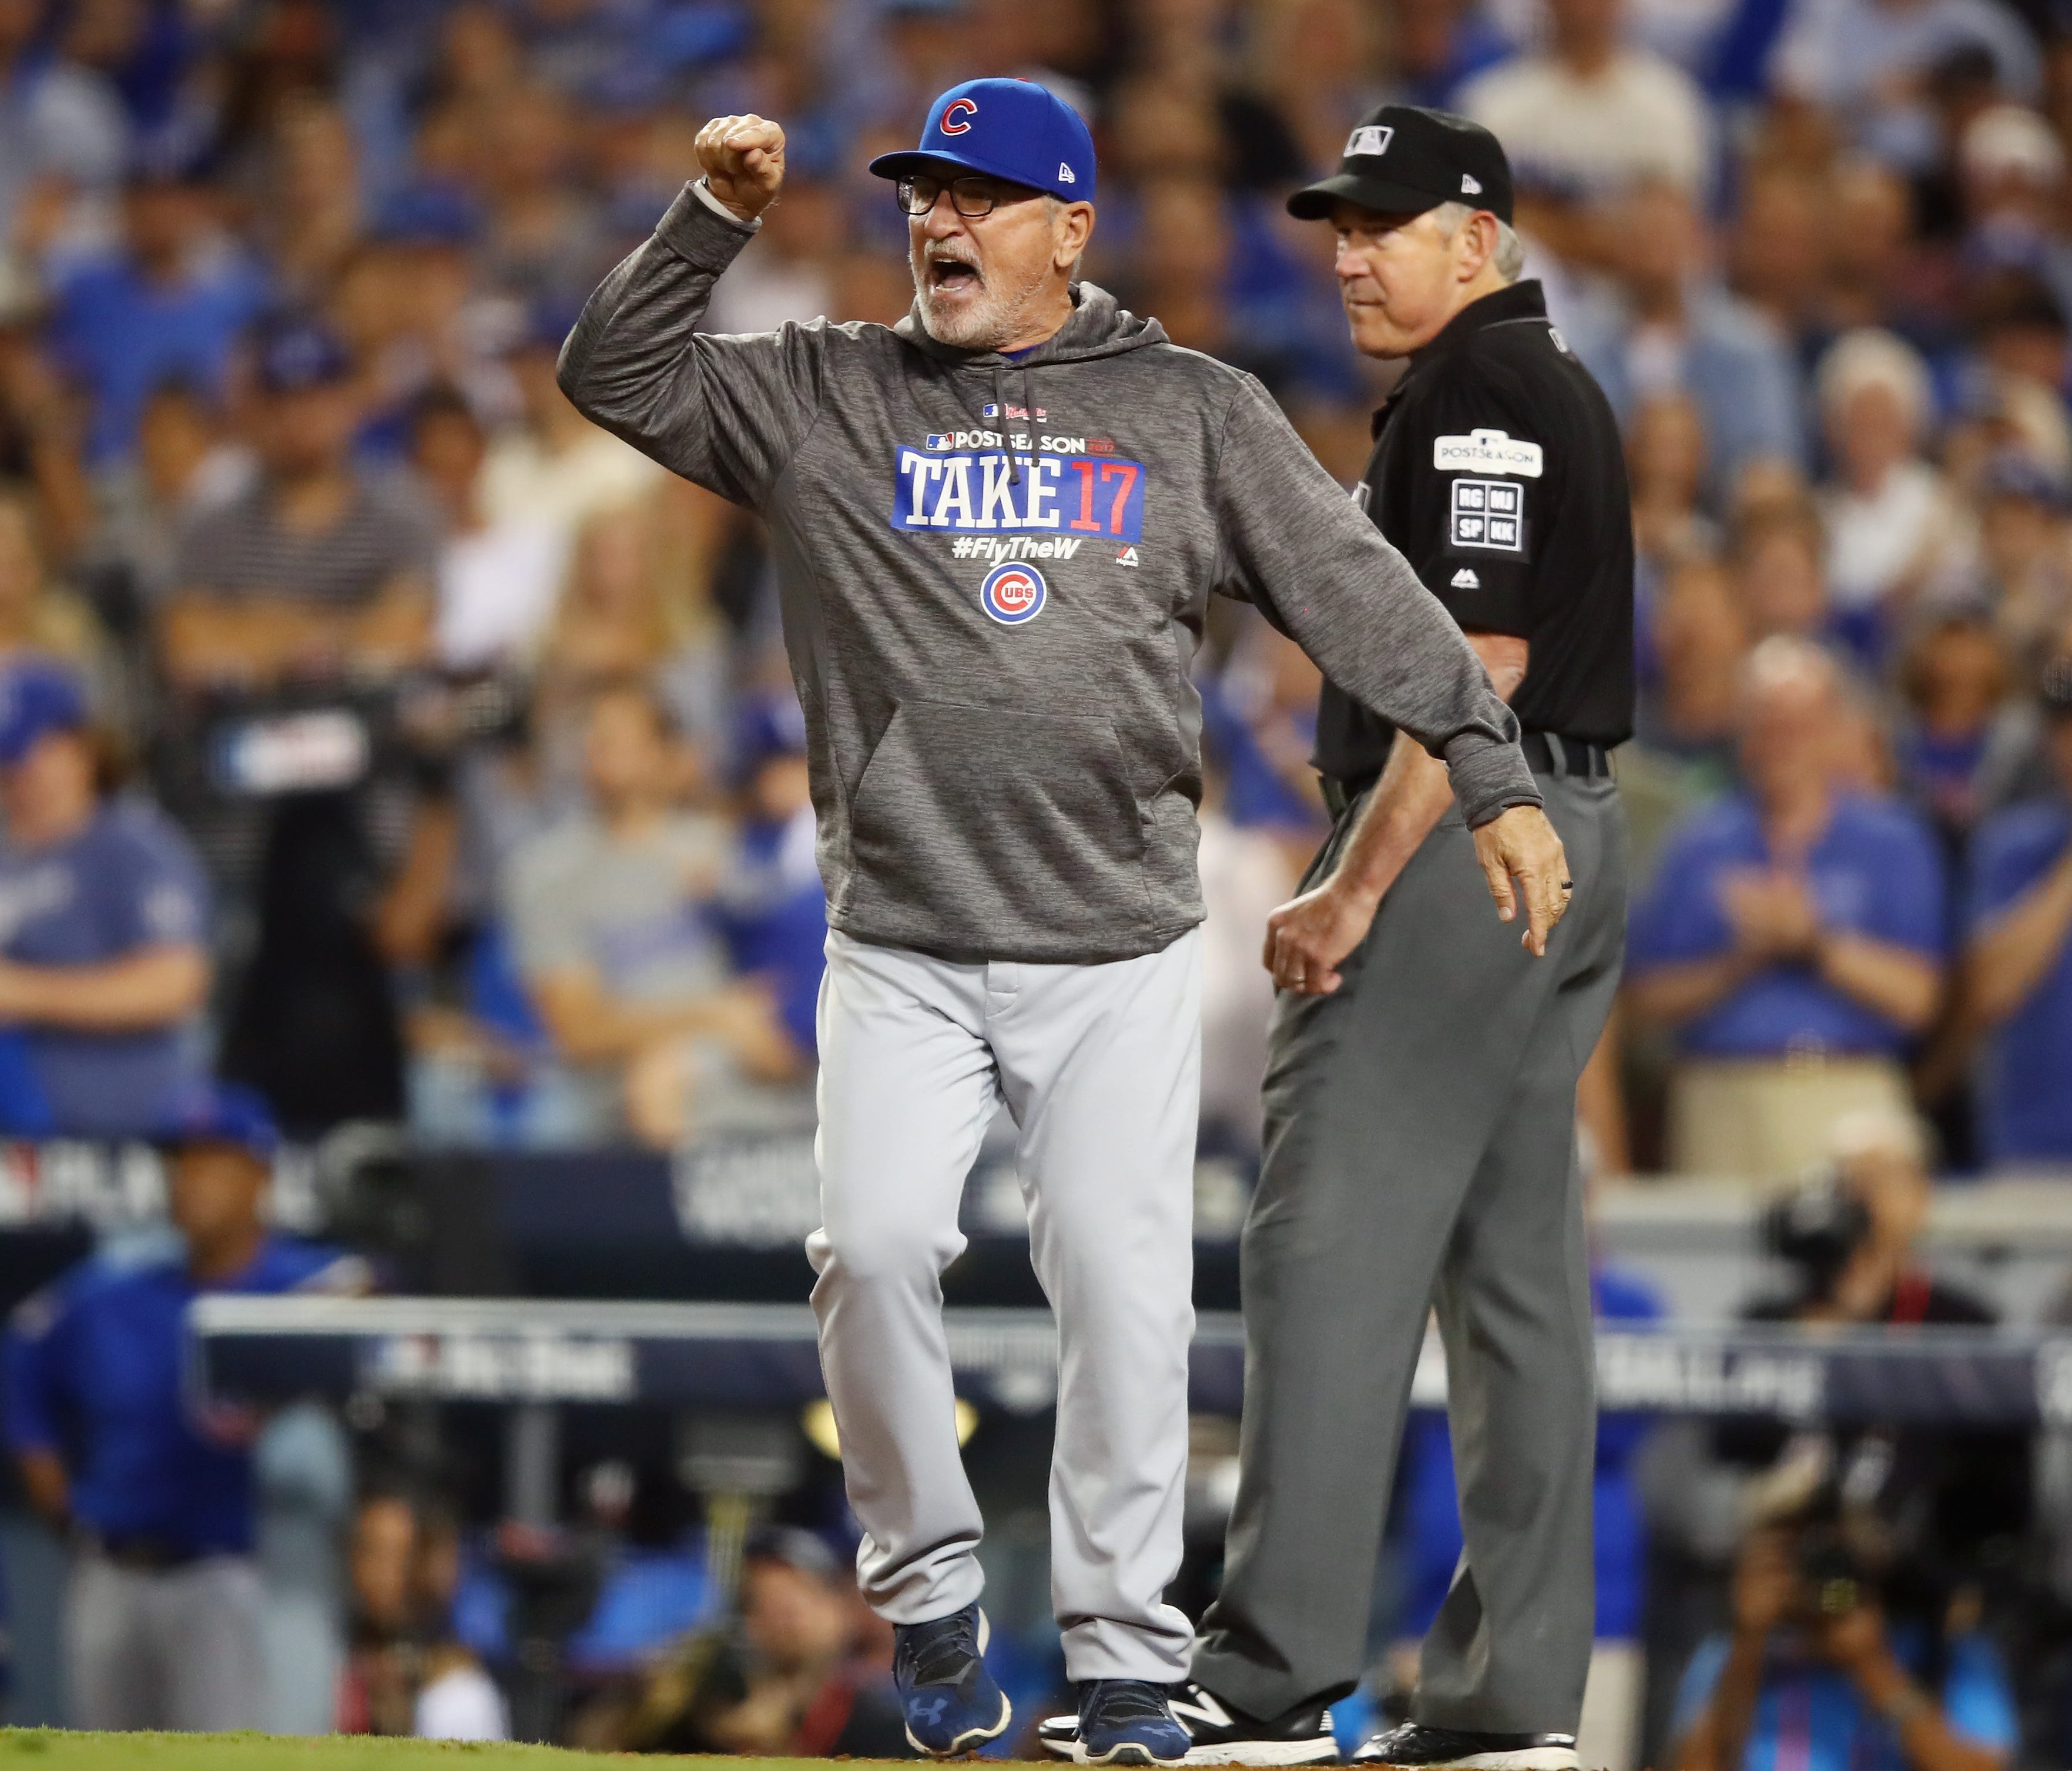 Joe Maddon argues a call with an umpire in the seventh inning.